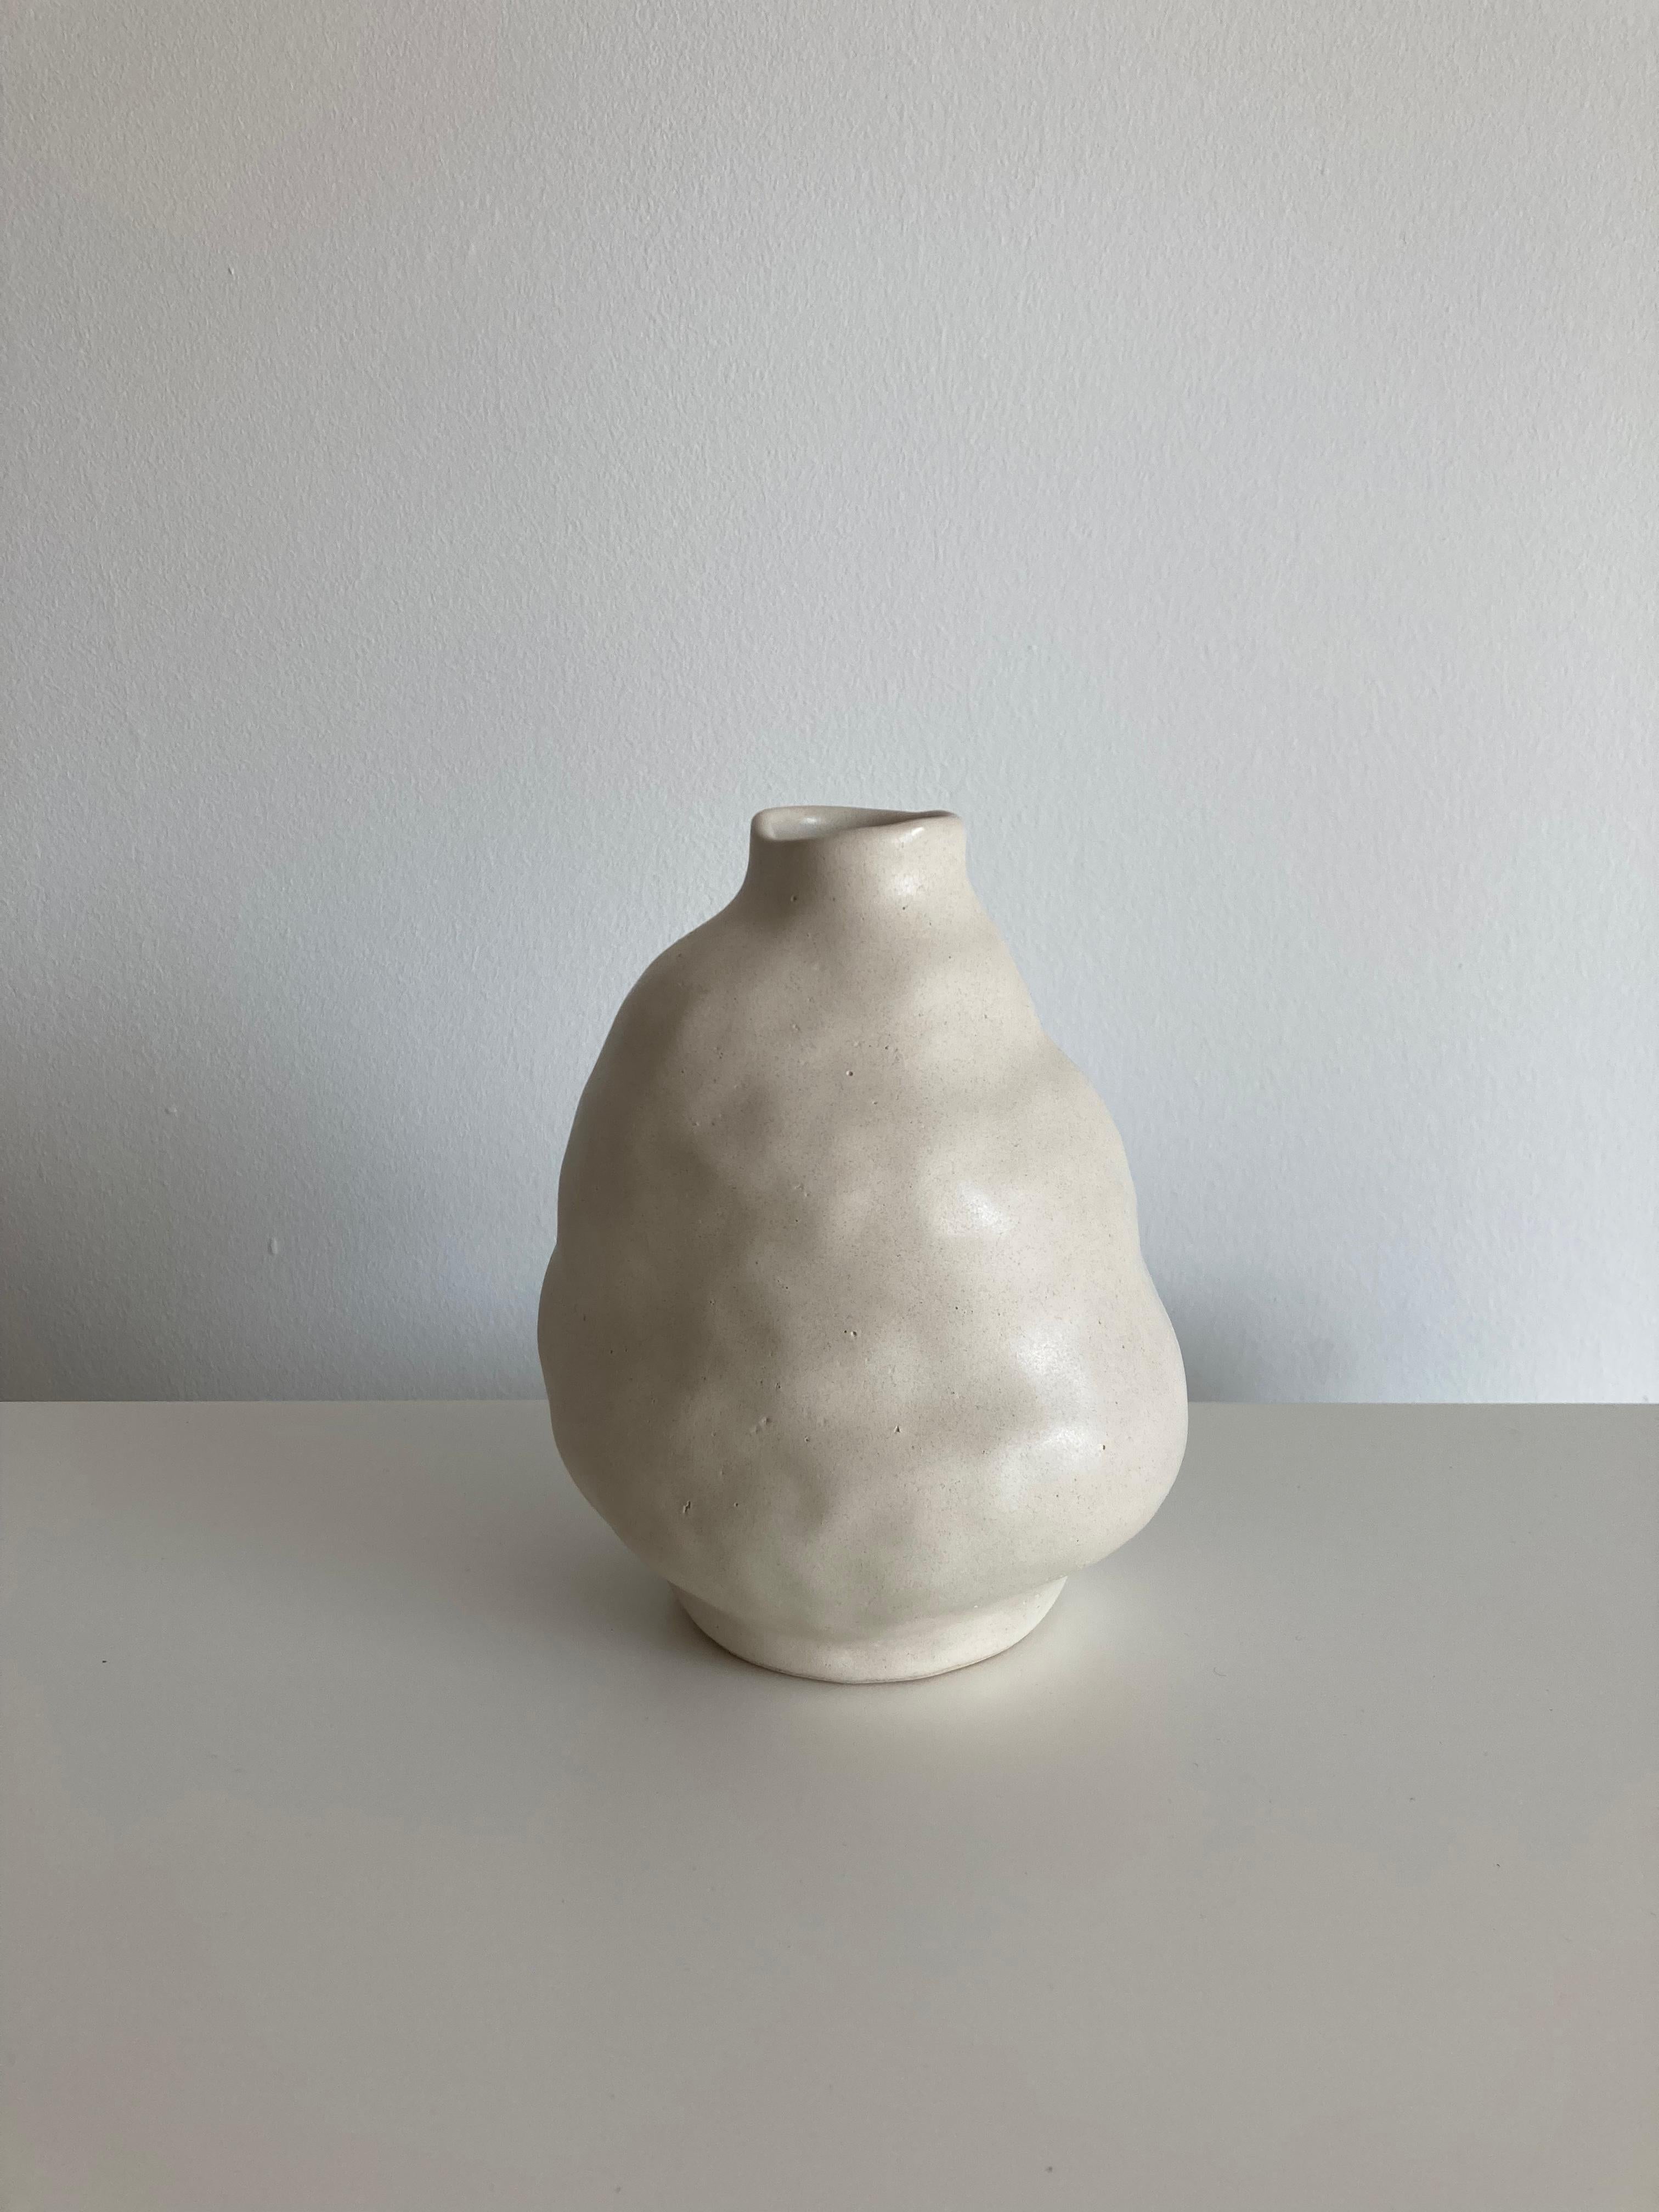 No.90 stoneware sculpture, Tonfisk by Ciona Lee 
One of a Kind
Dimensions: Ø 11 x H 15 cm
Materials: White stoneware, satin cream glaze
Variations of size and colour available

Tonfisk is the ceramic practice by Ciona Lee, a Korean-Italian